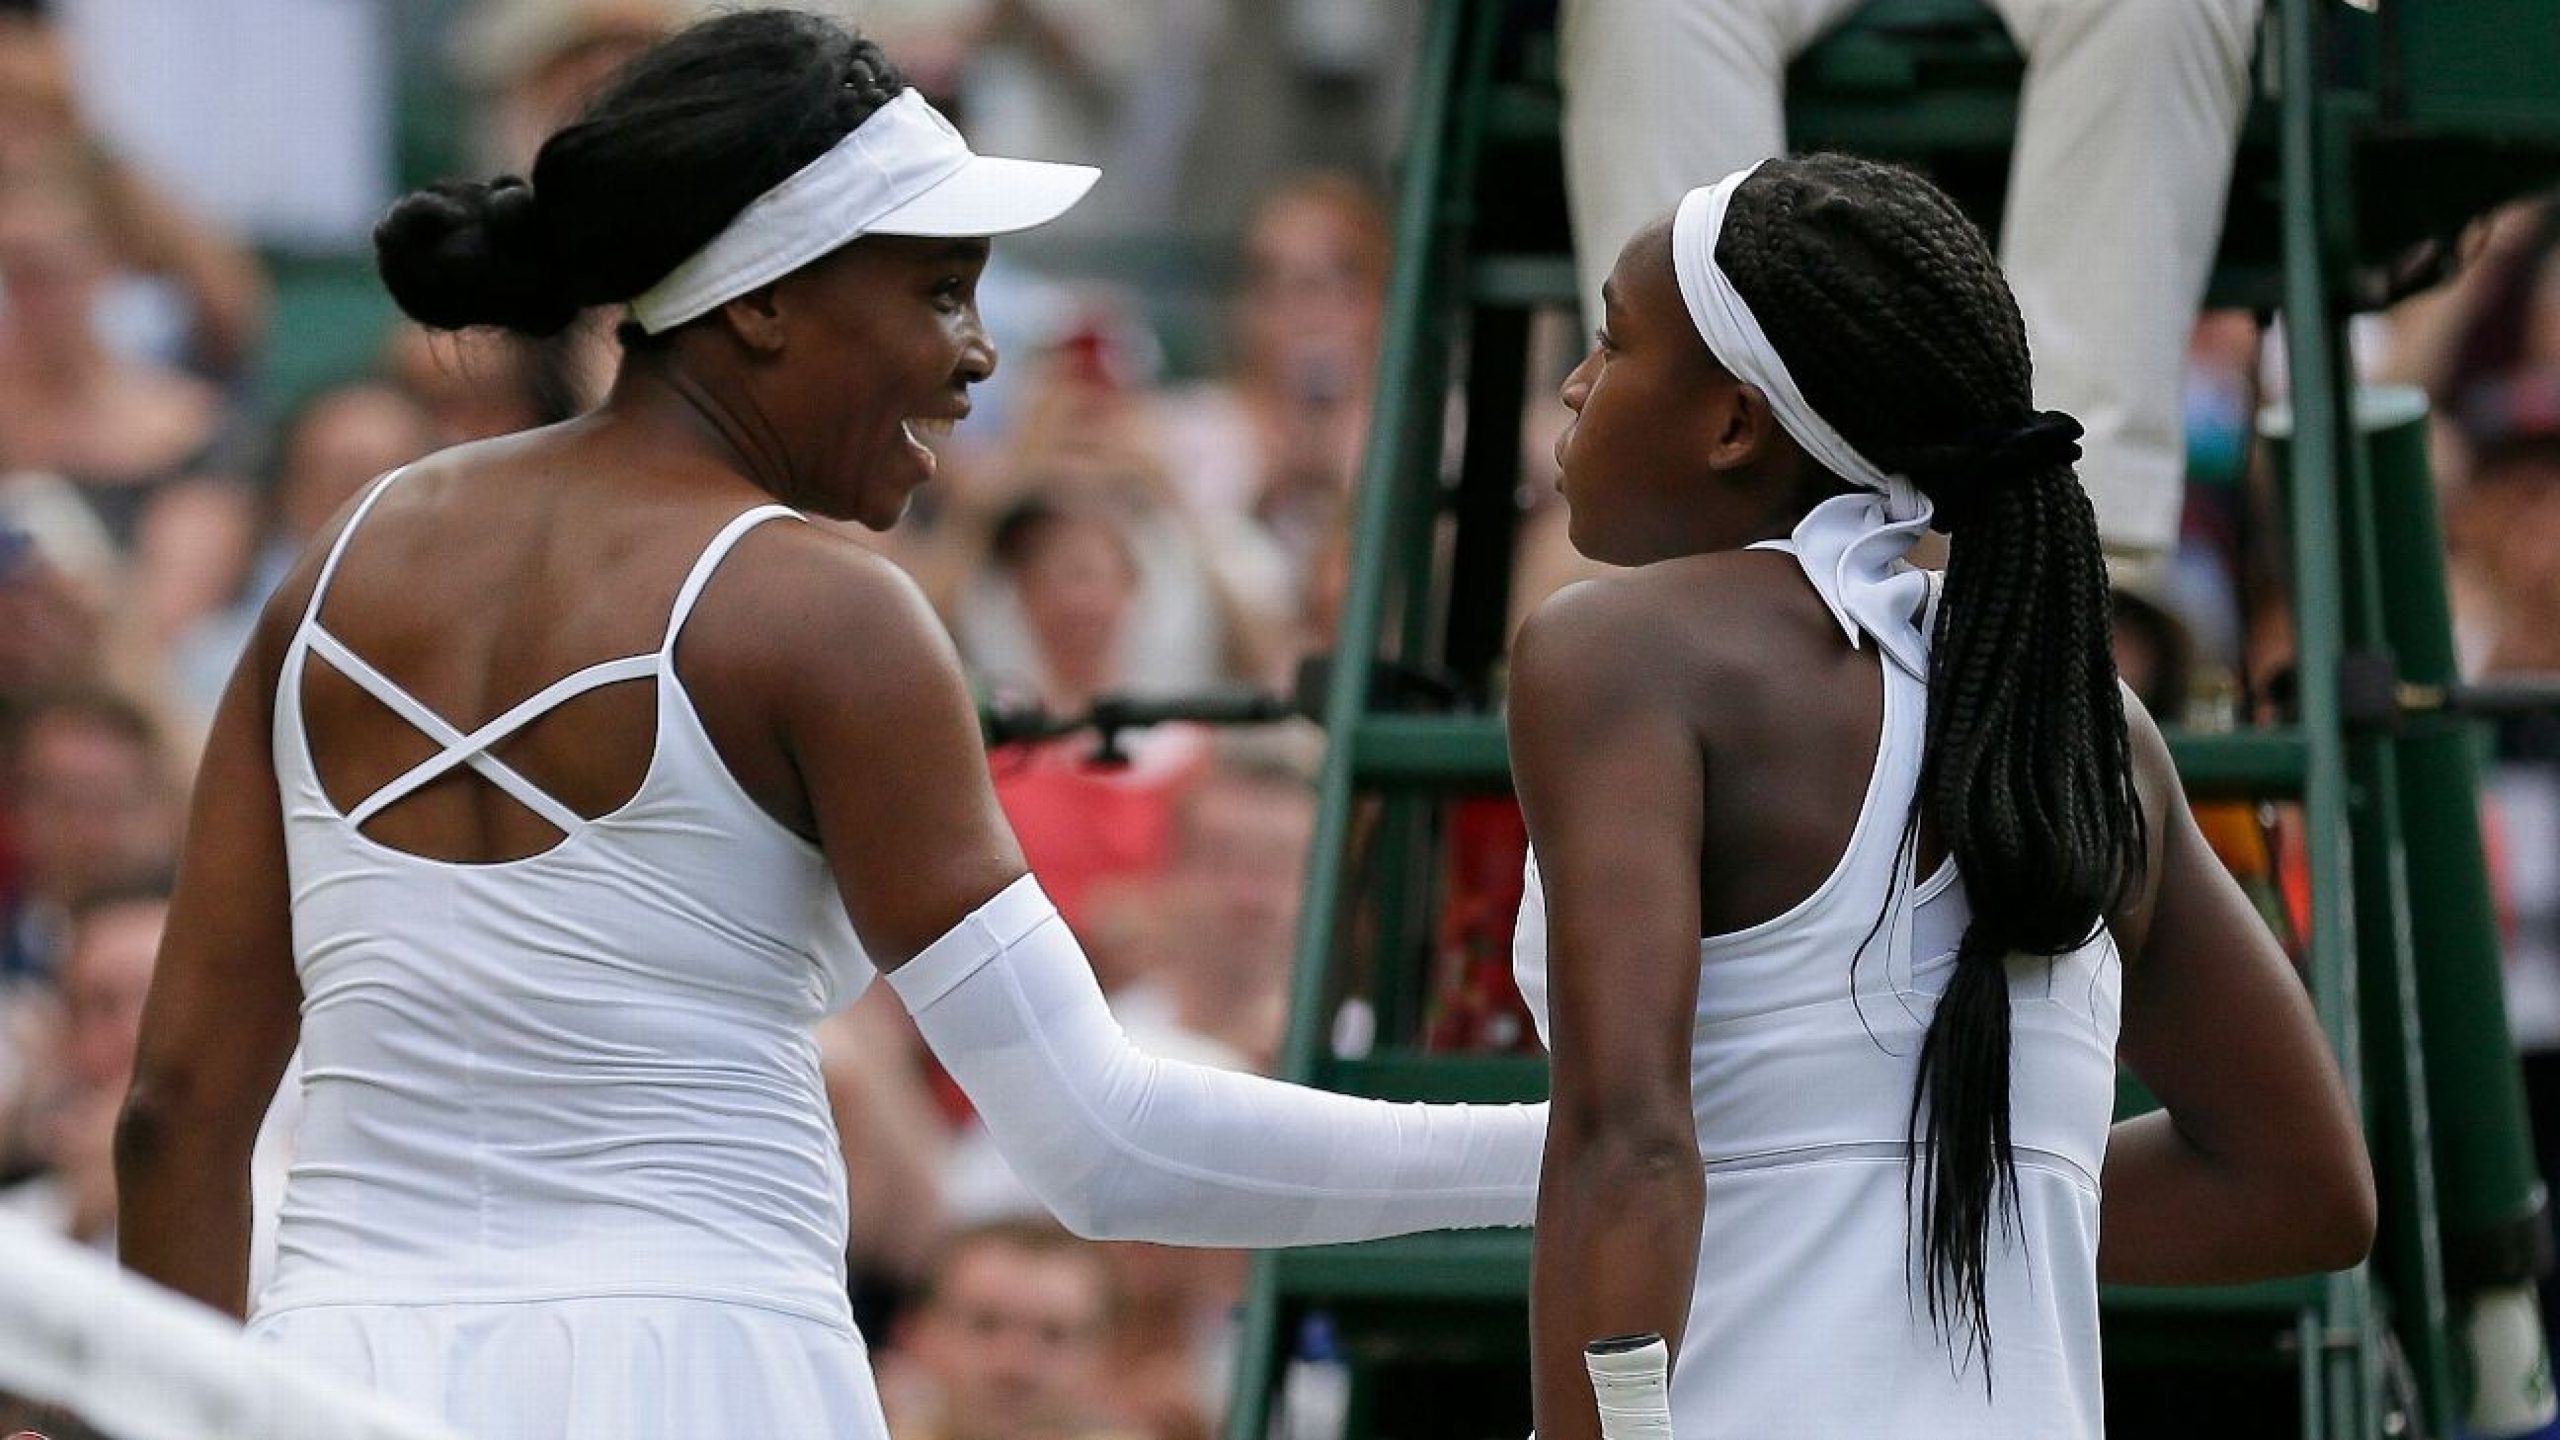 Before Venus and Coco, these doubles pairings packed the star power